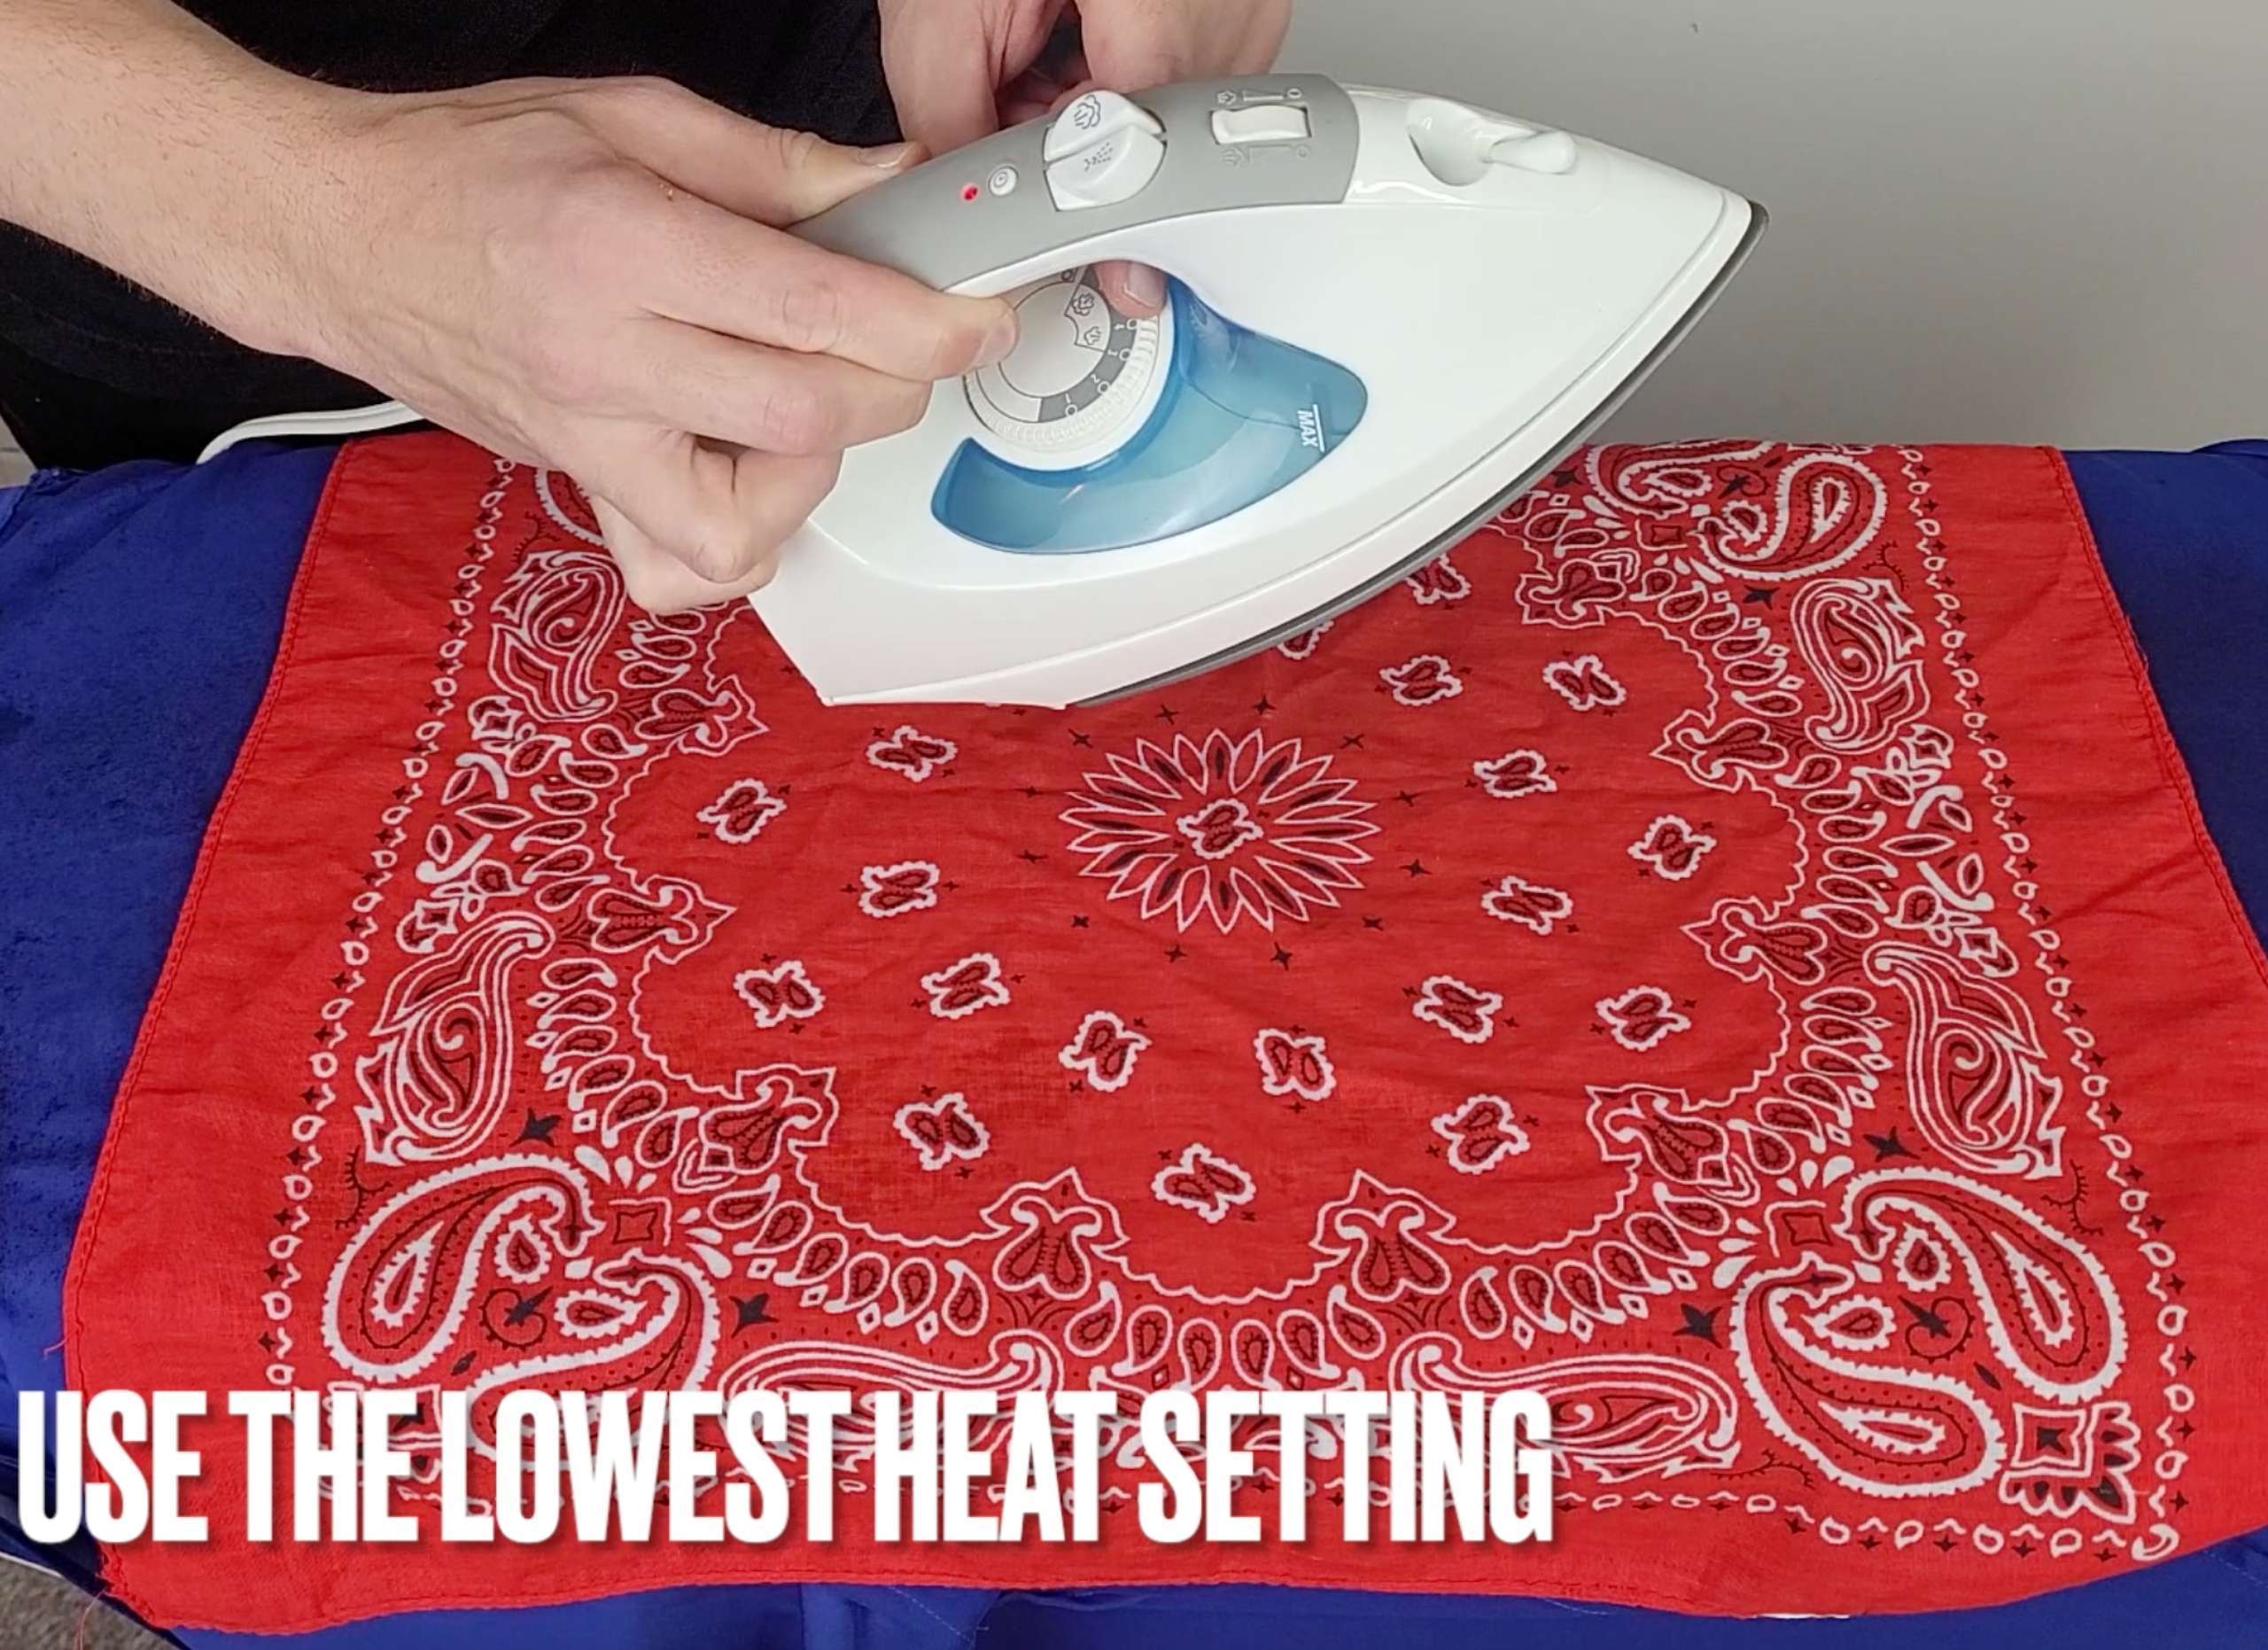 picture of a man holding an iron and adjusting the heat setting to the lowest level